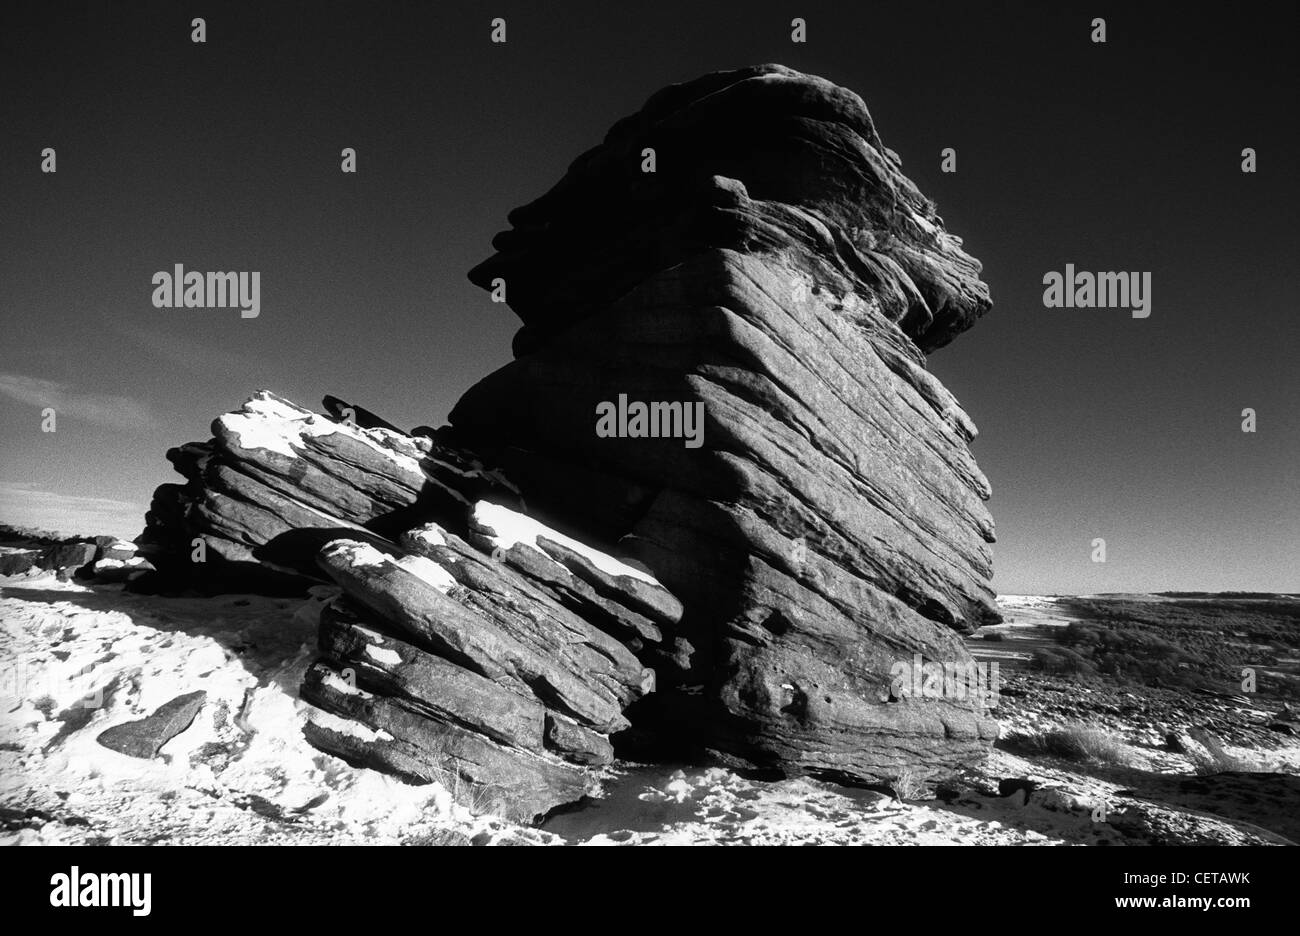 Black and white landscape of dramatic, rugged gritstone rocks covered in snow near Hathersage, Derbyshire in the Peak District. Stock Photo